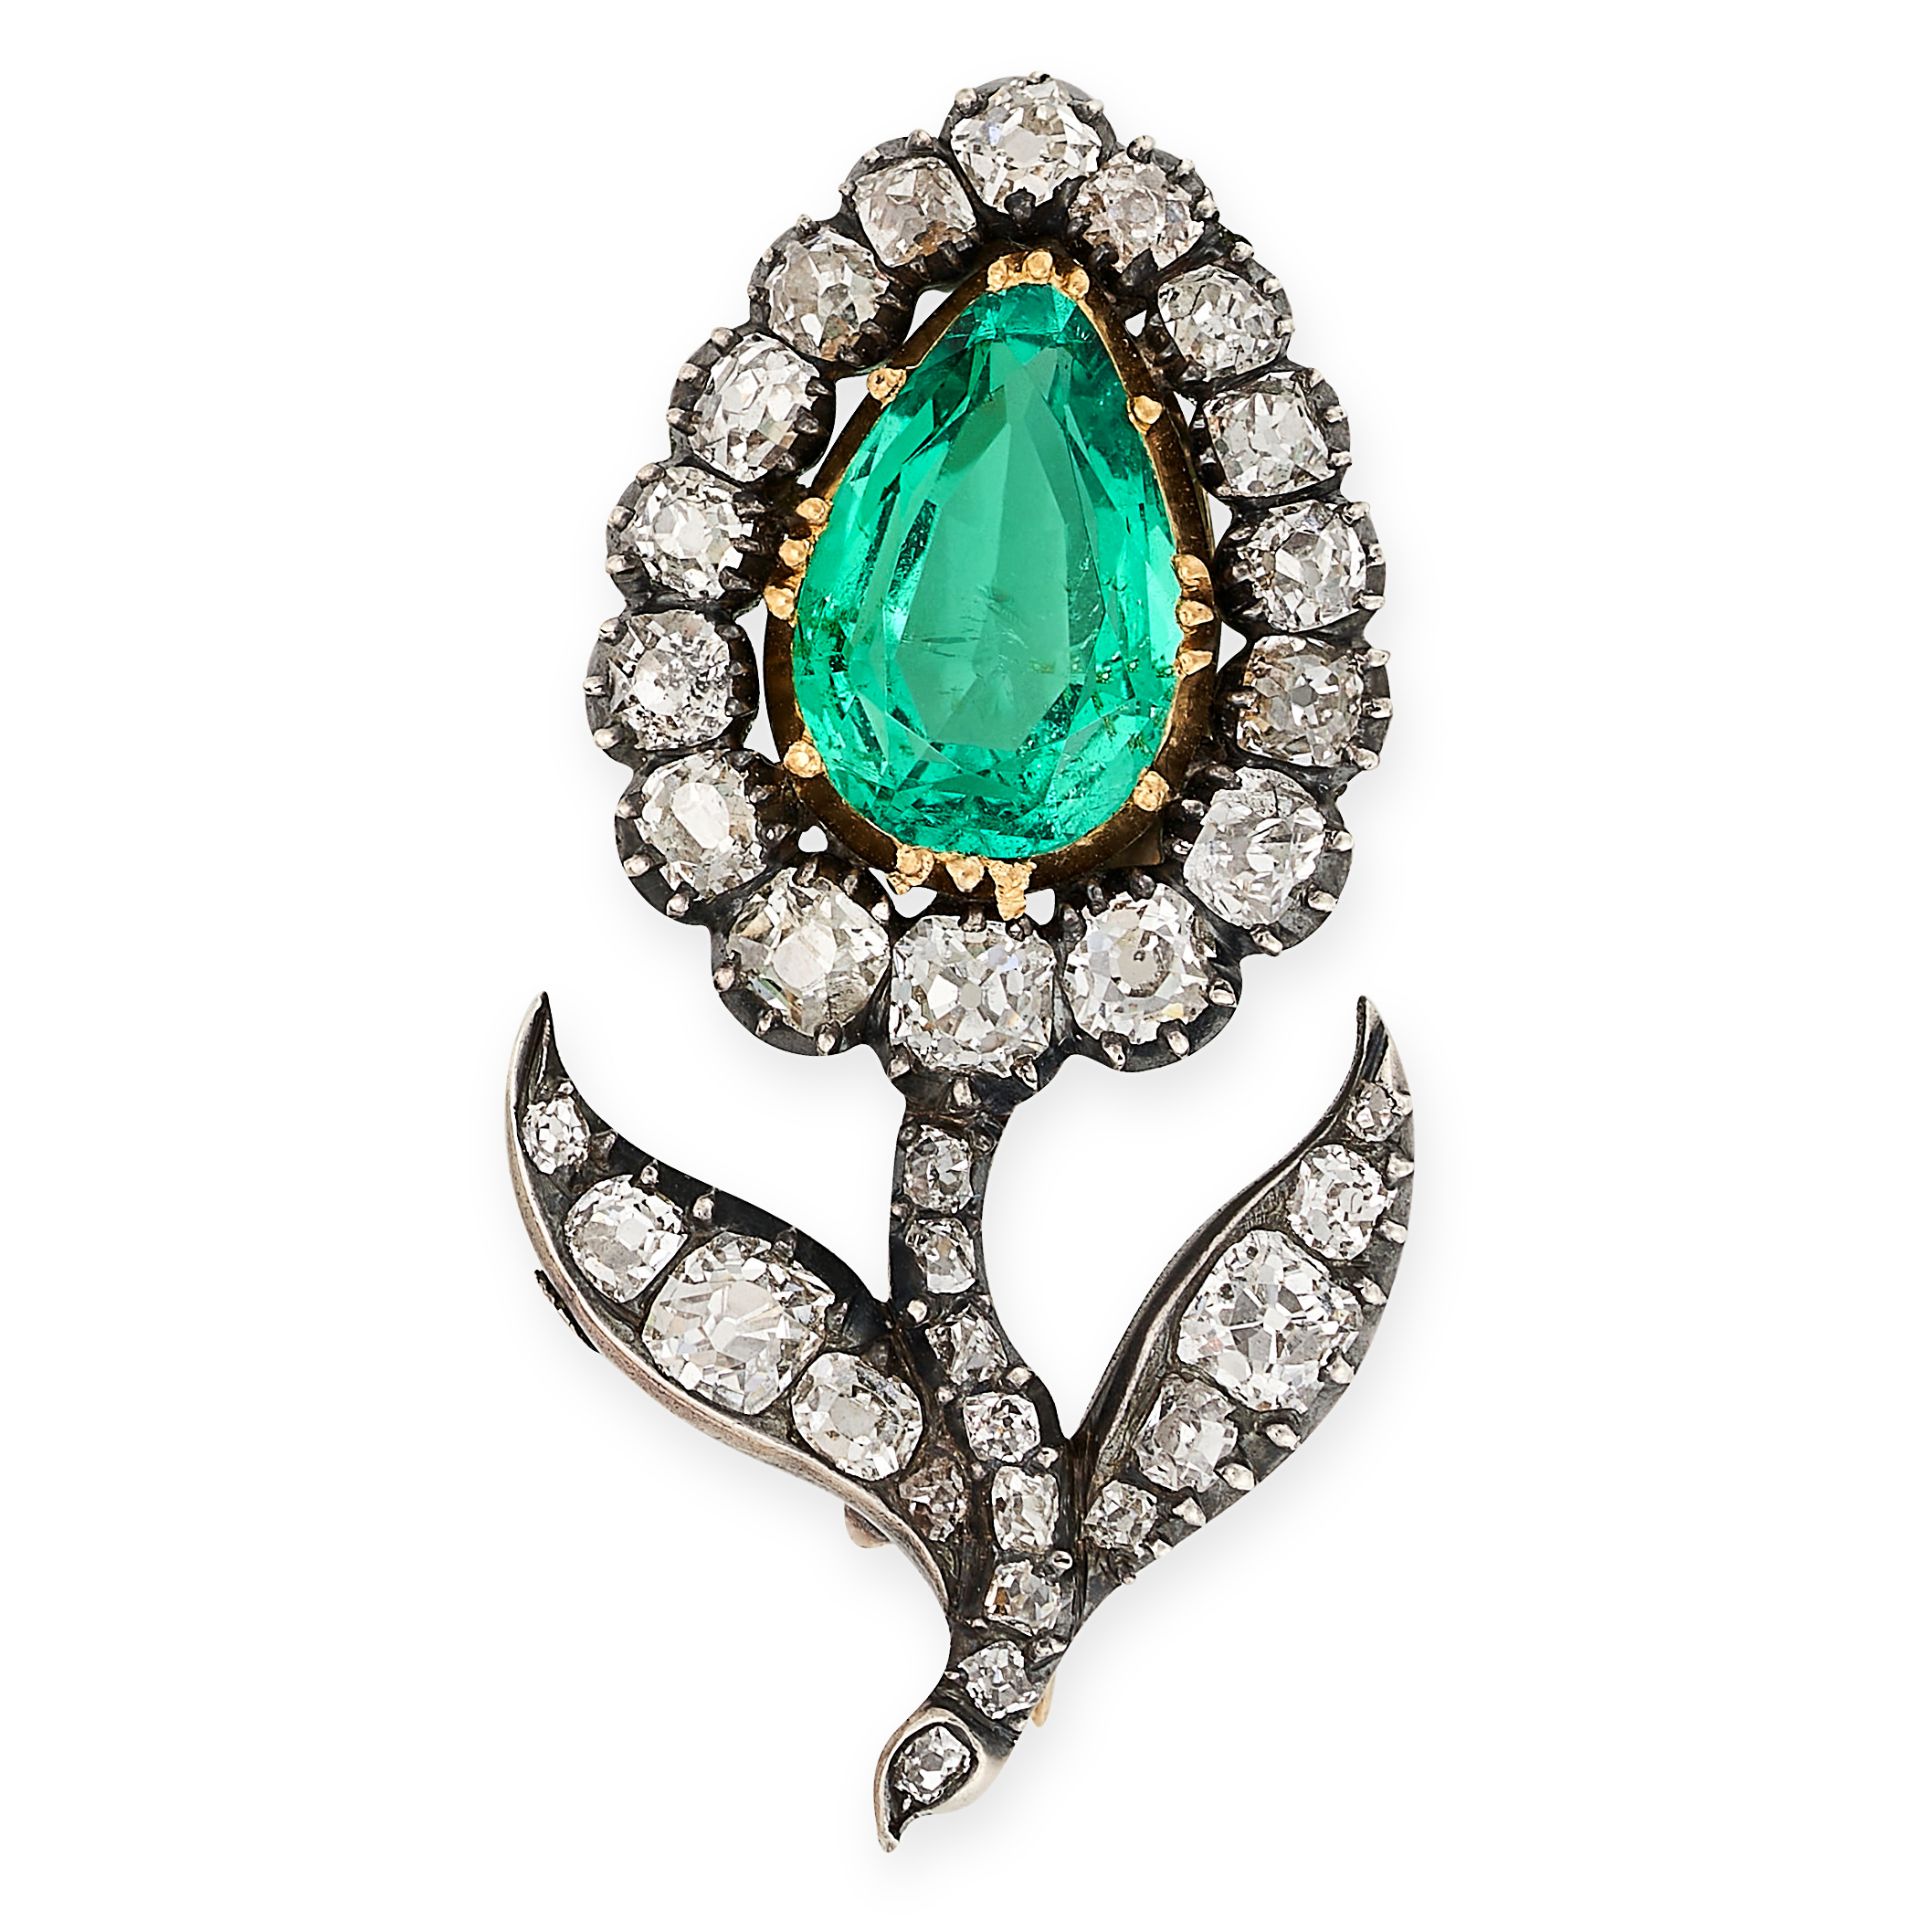 A FINE ANTIQUE COLOMBIAN EMERALD AND DIAMOND BROOCH in yellow gold and silver, designed as a flower,